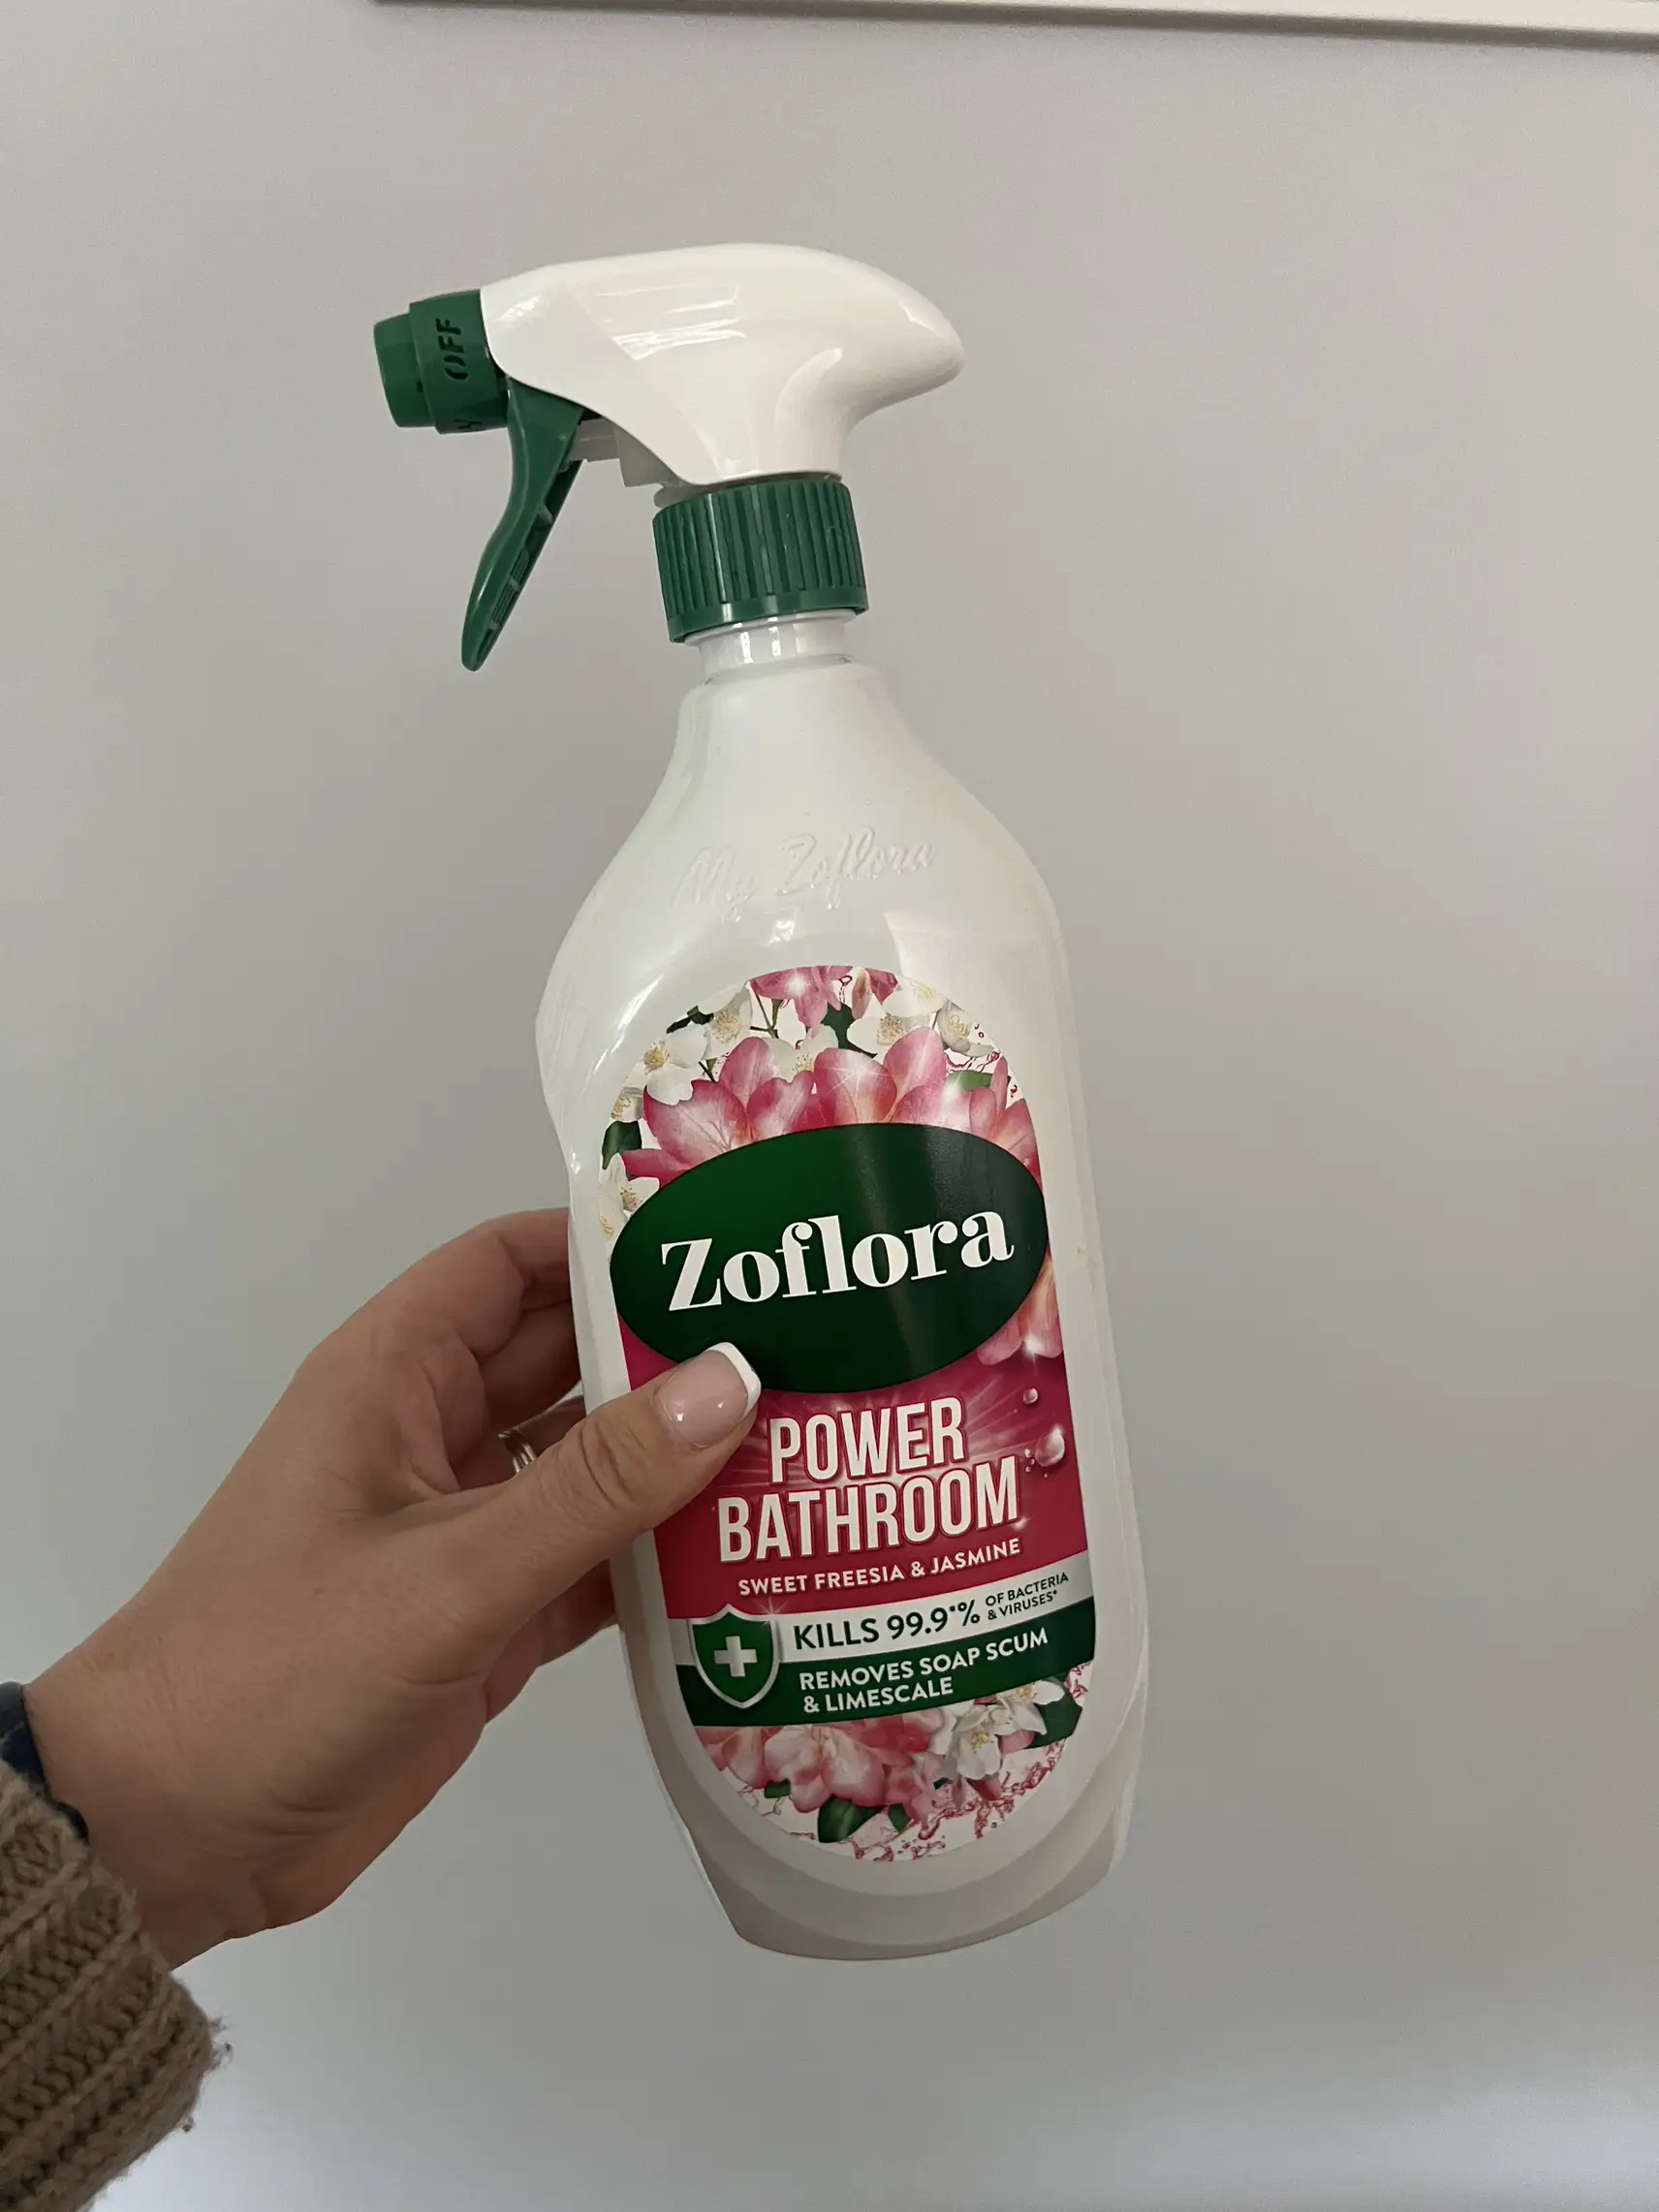 The Best Kitchen Cleaning Products We Can't Live Without - By Sophia Lee